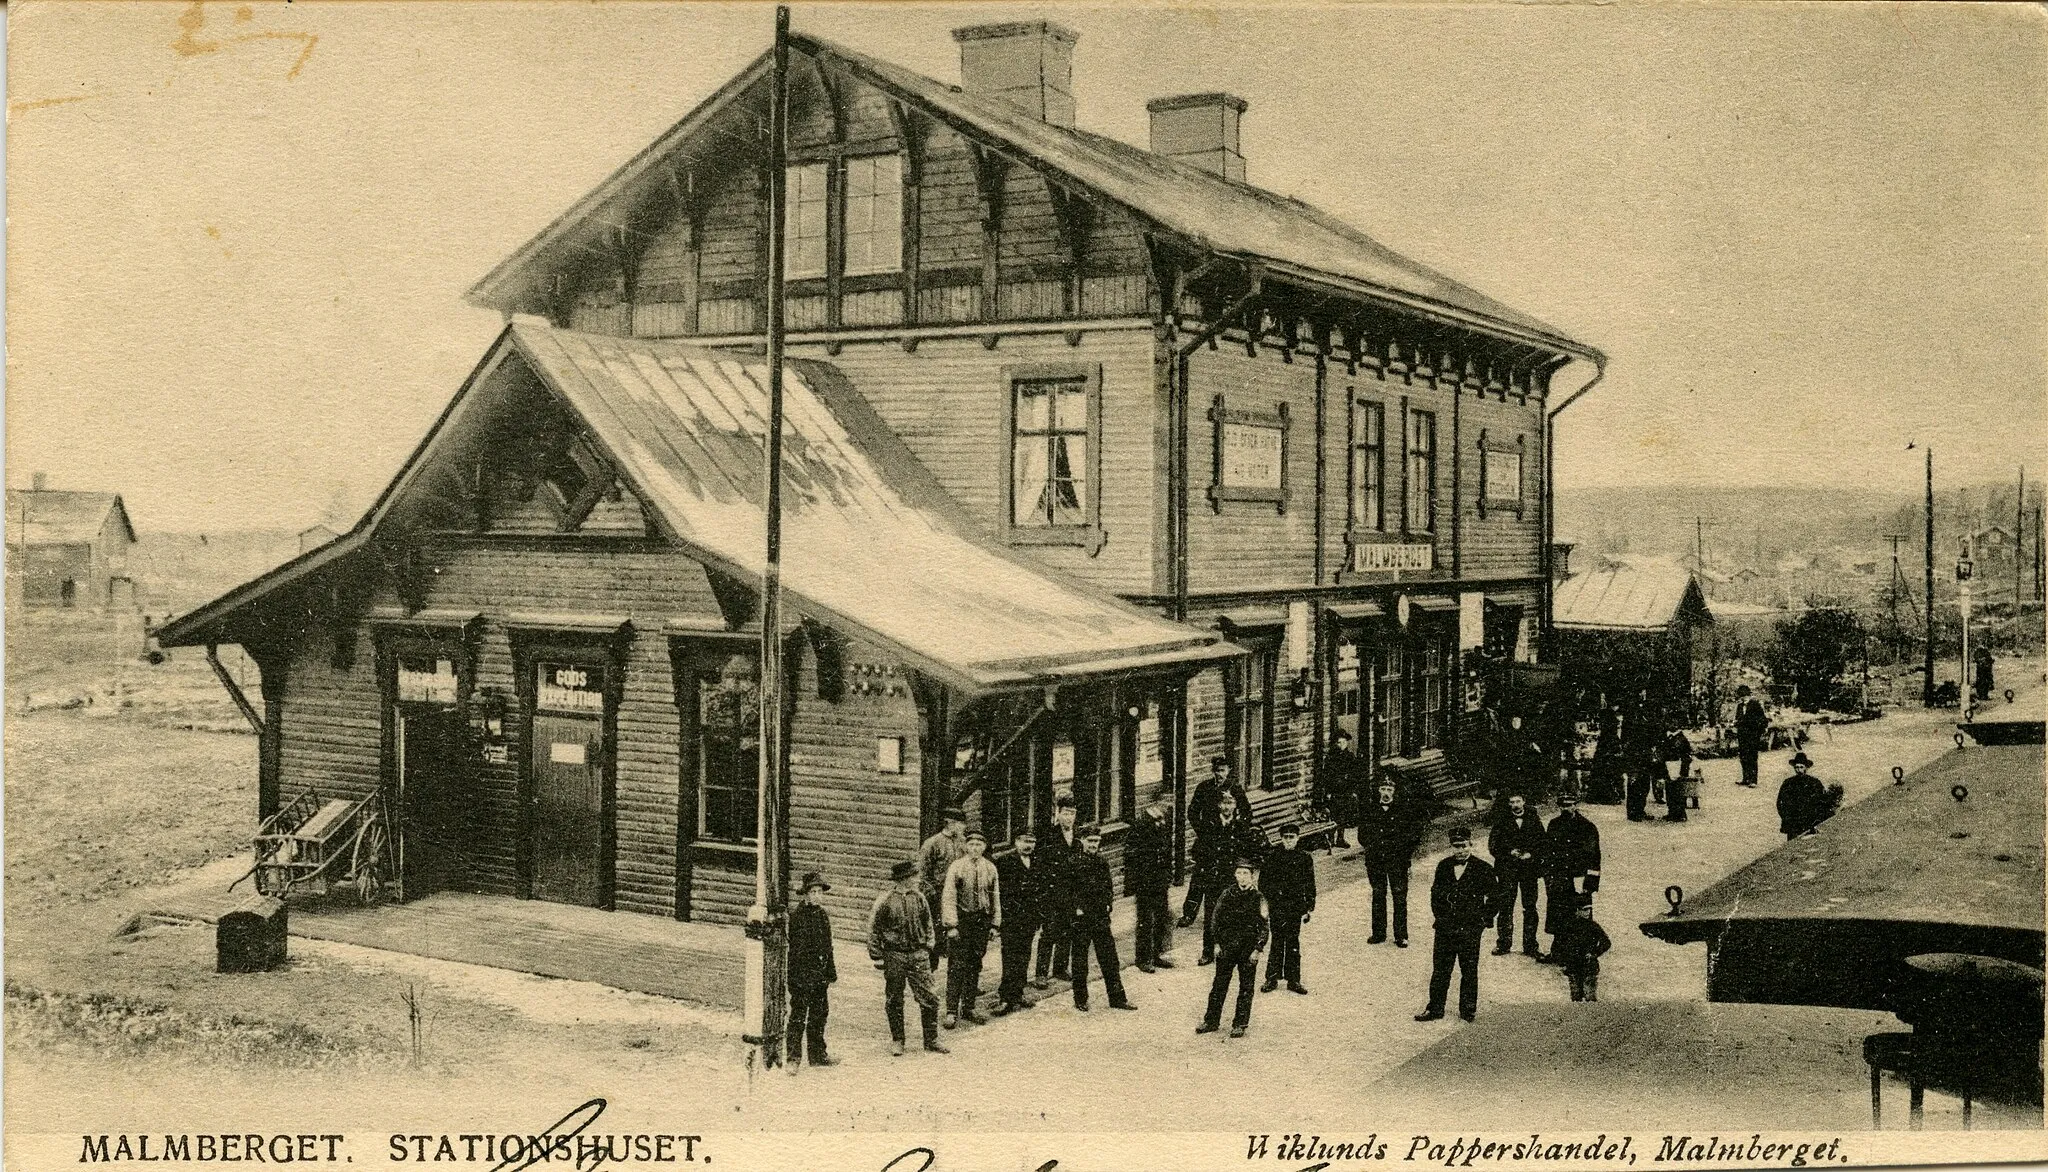 Image of Malmberget